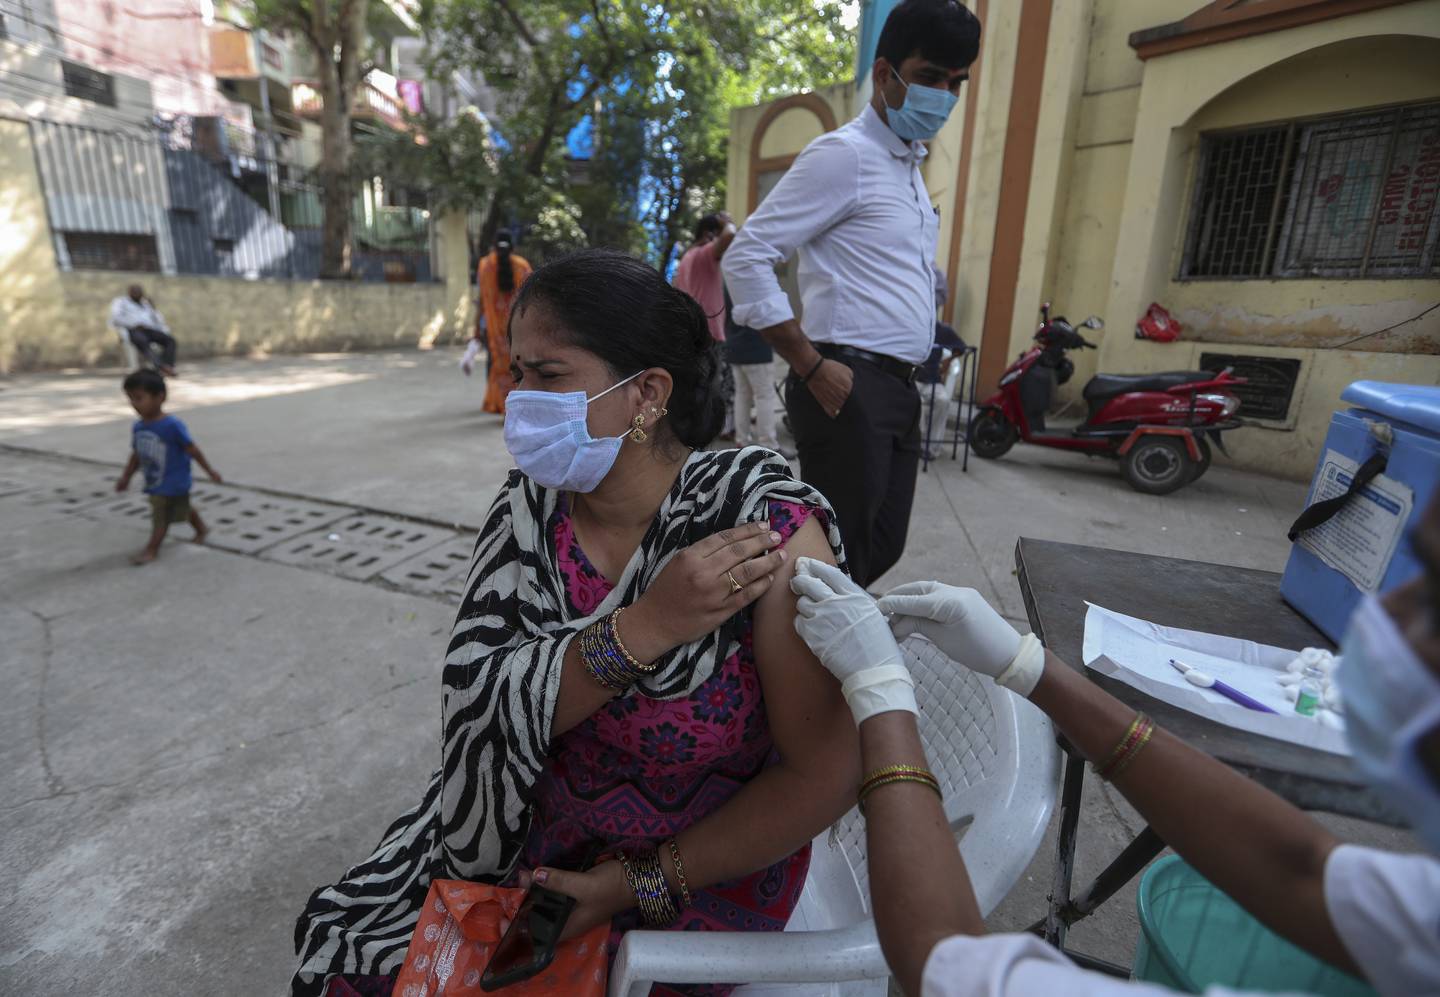 A health worker administers the Covishield coronavirus vaccine in Hyderabad, India, on December 15, 2021. AP